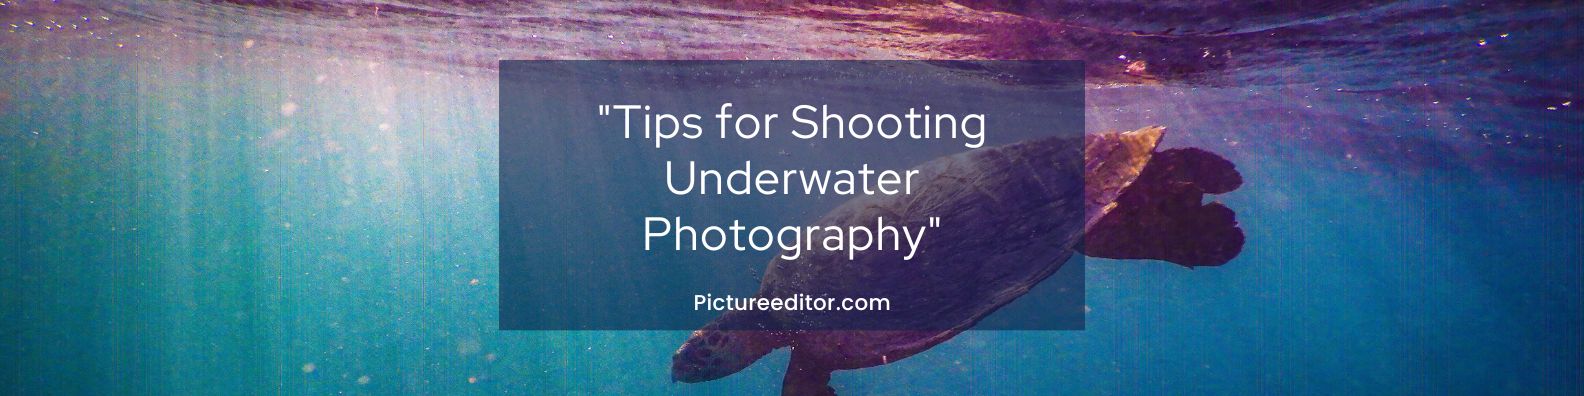 Tips for Shooting Underwater Photography